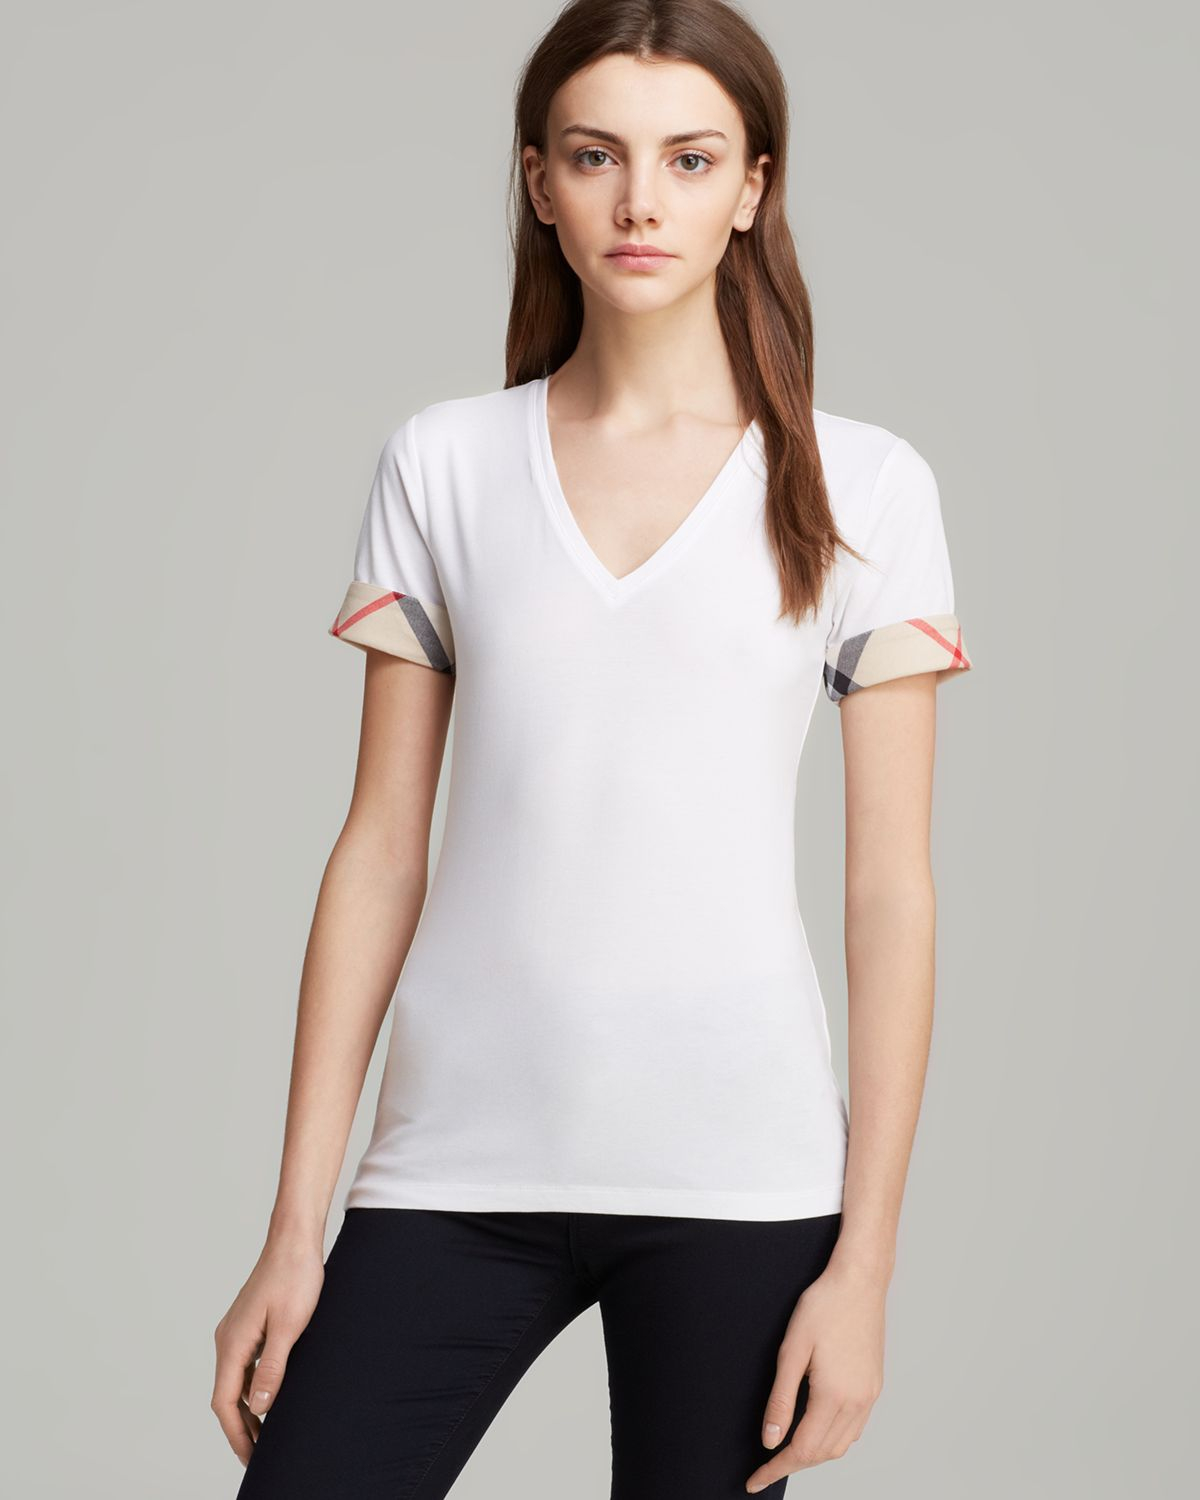 Burberry Brit Vneck Check Cuff Tee in White | Lyst